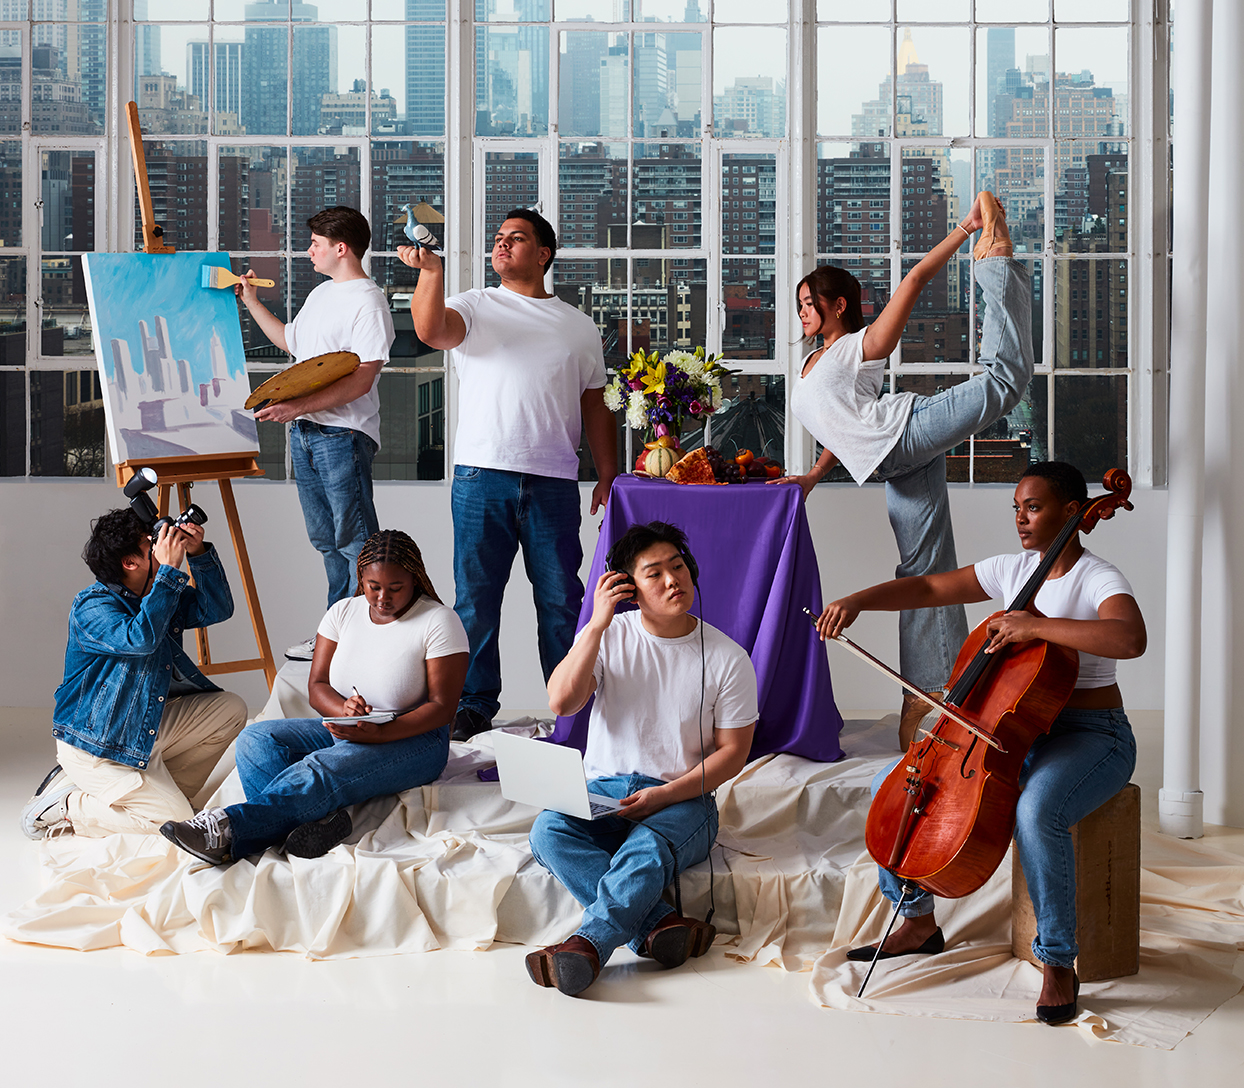 A diverse group of seven people, dressed casually in white T-shirts and jeans, engaging in the following artistic activities: painting, photography, writing, instrument playing, music production, acting, and dance in a bright studio with large windows overlooking a cityscape.